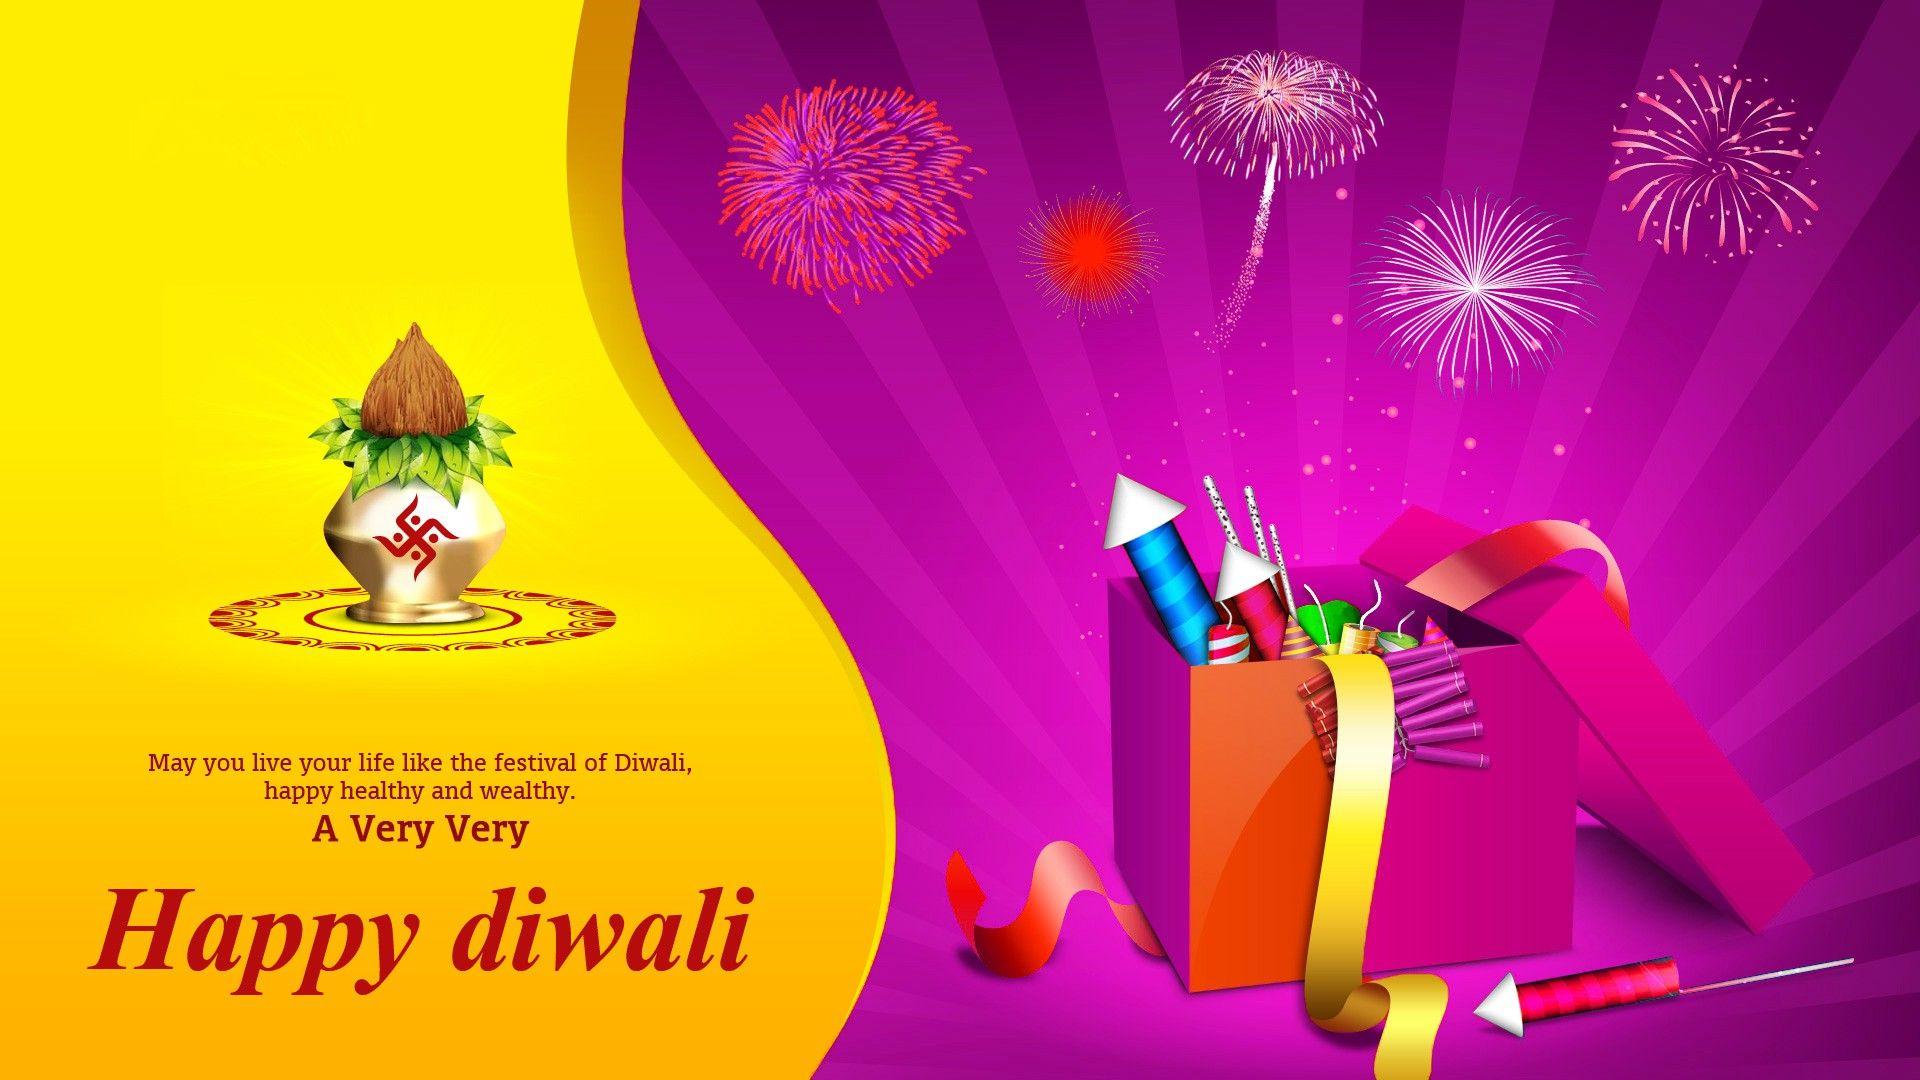 Happy Diwali Wishes Greeting Cards Download. Diwali Quotes Image